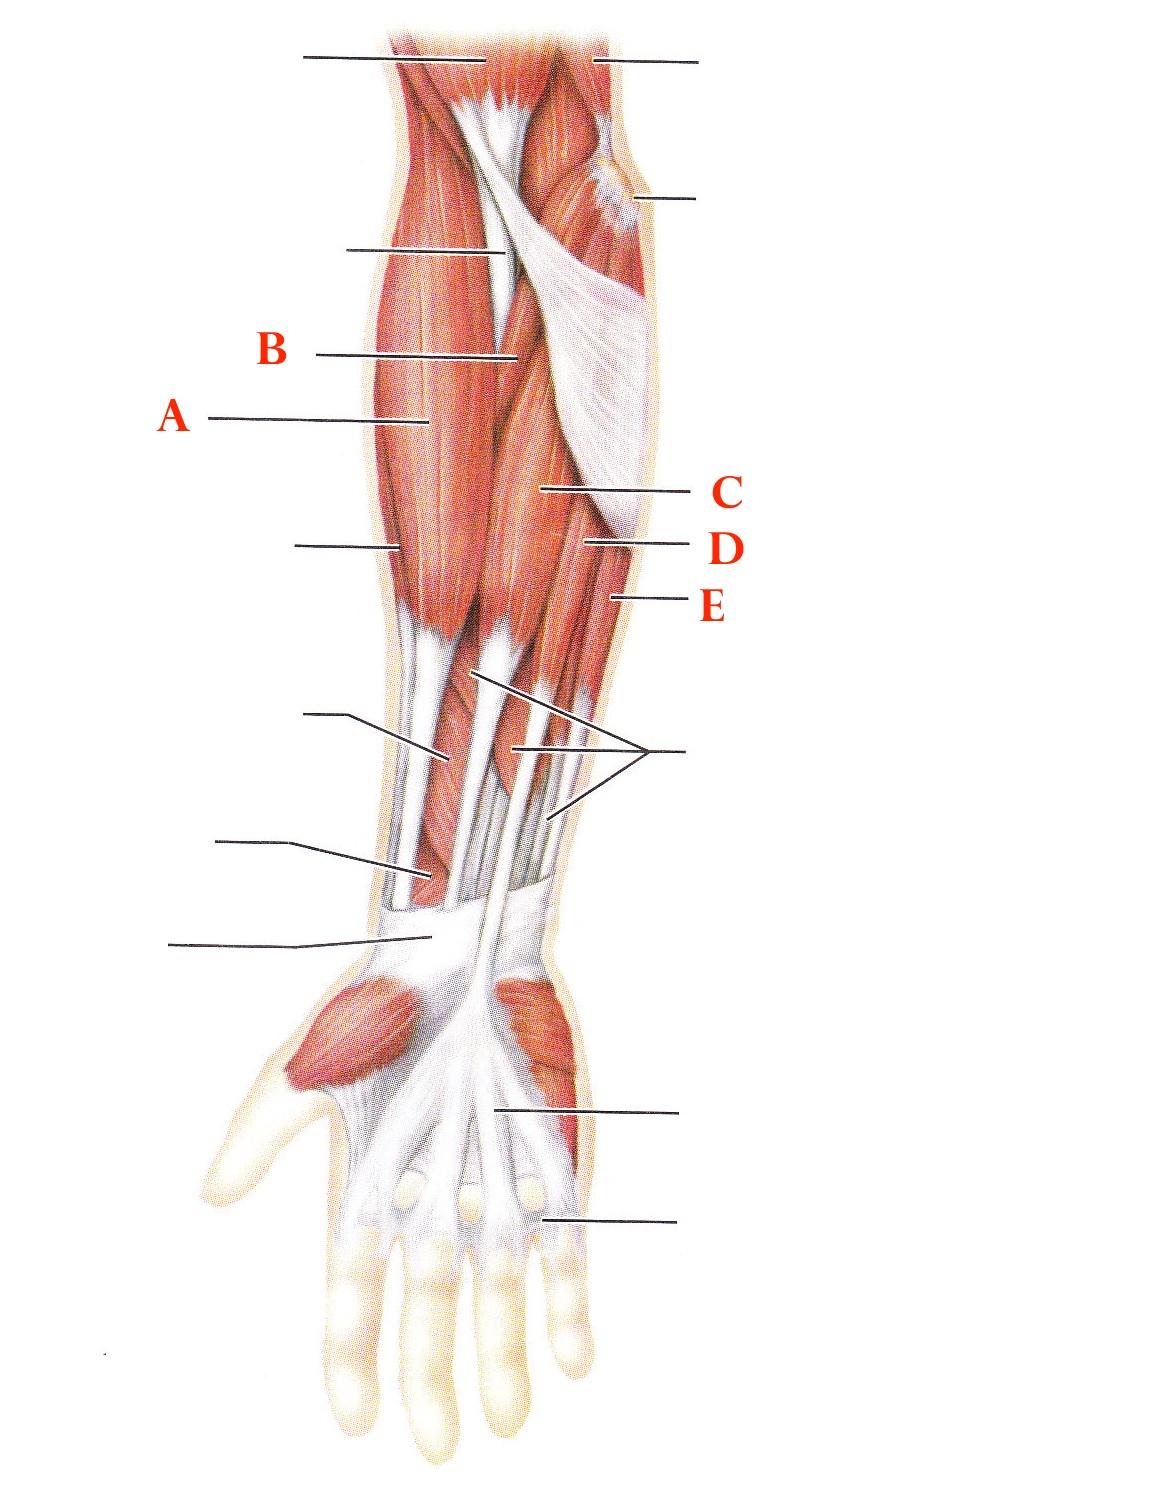 Posterior Arm Muscle Anatomy Quiz | vlr.eng.br